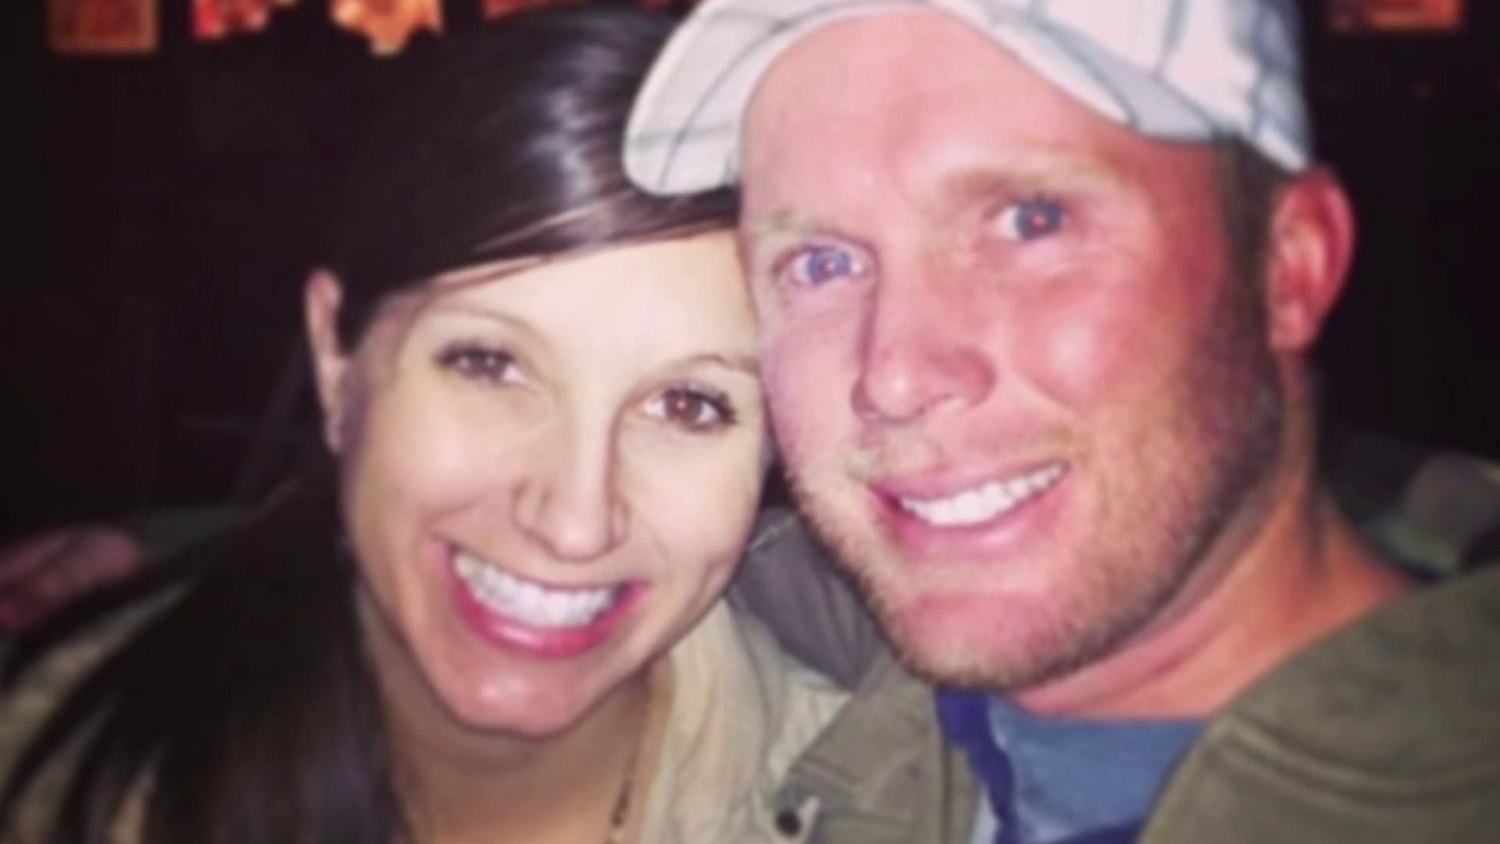 Utah mom accused of killing husband tried to poison him multiple times before, family says pic